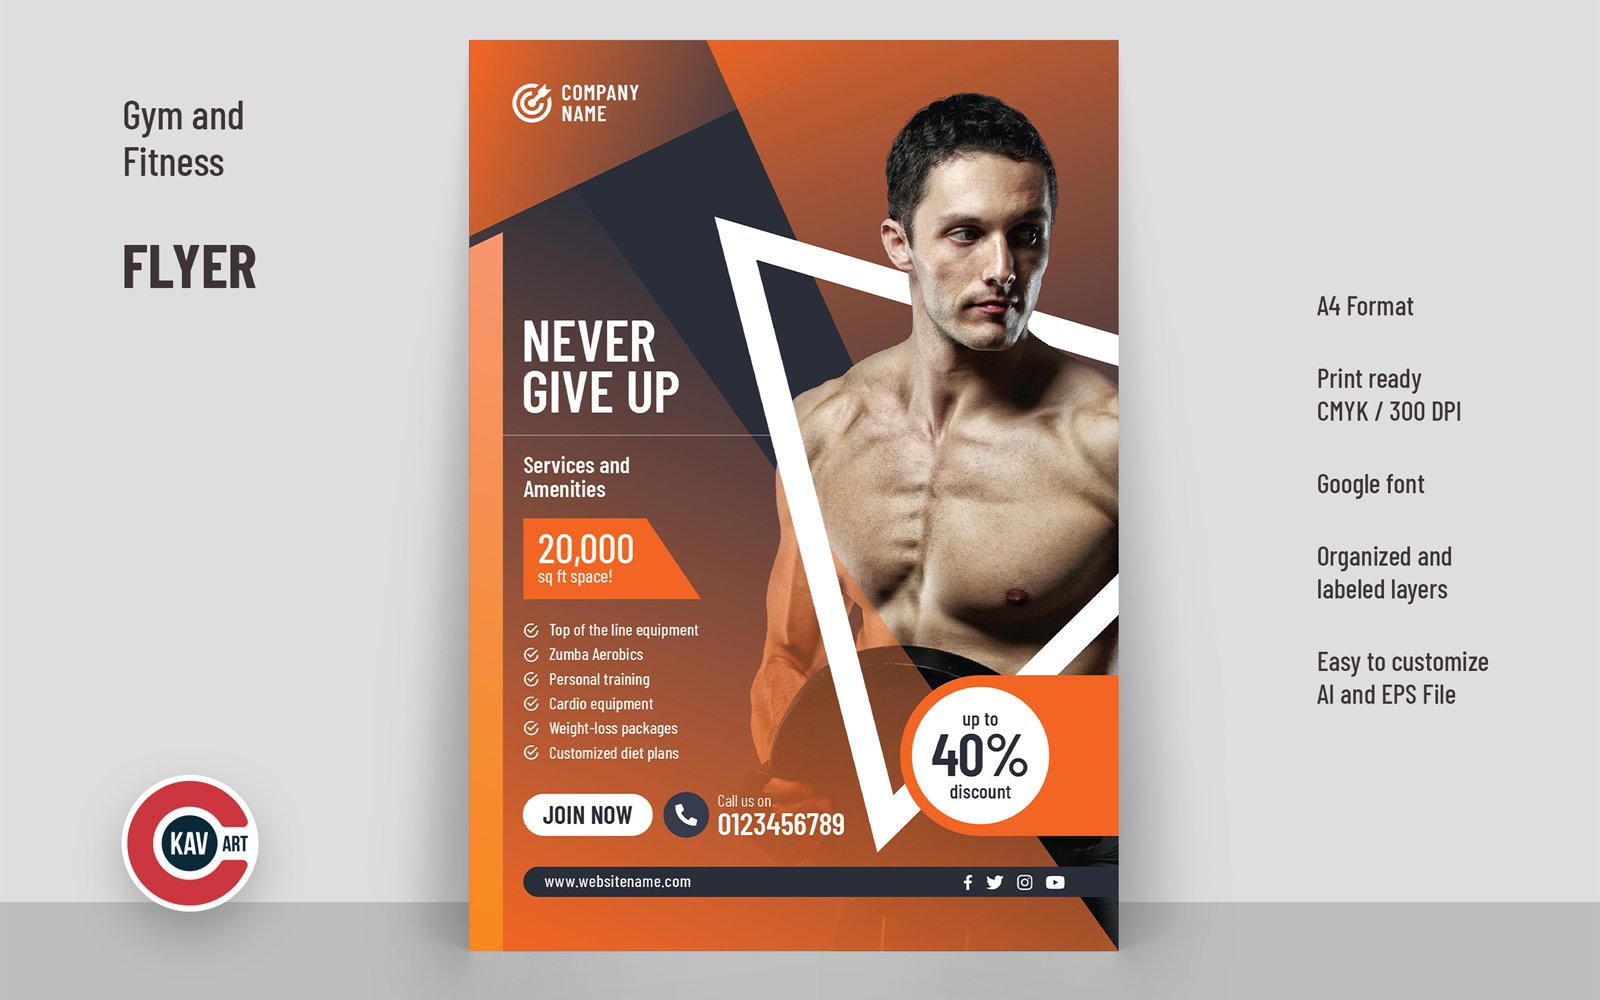 Gym and Fitness Flyer or Poster Template